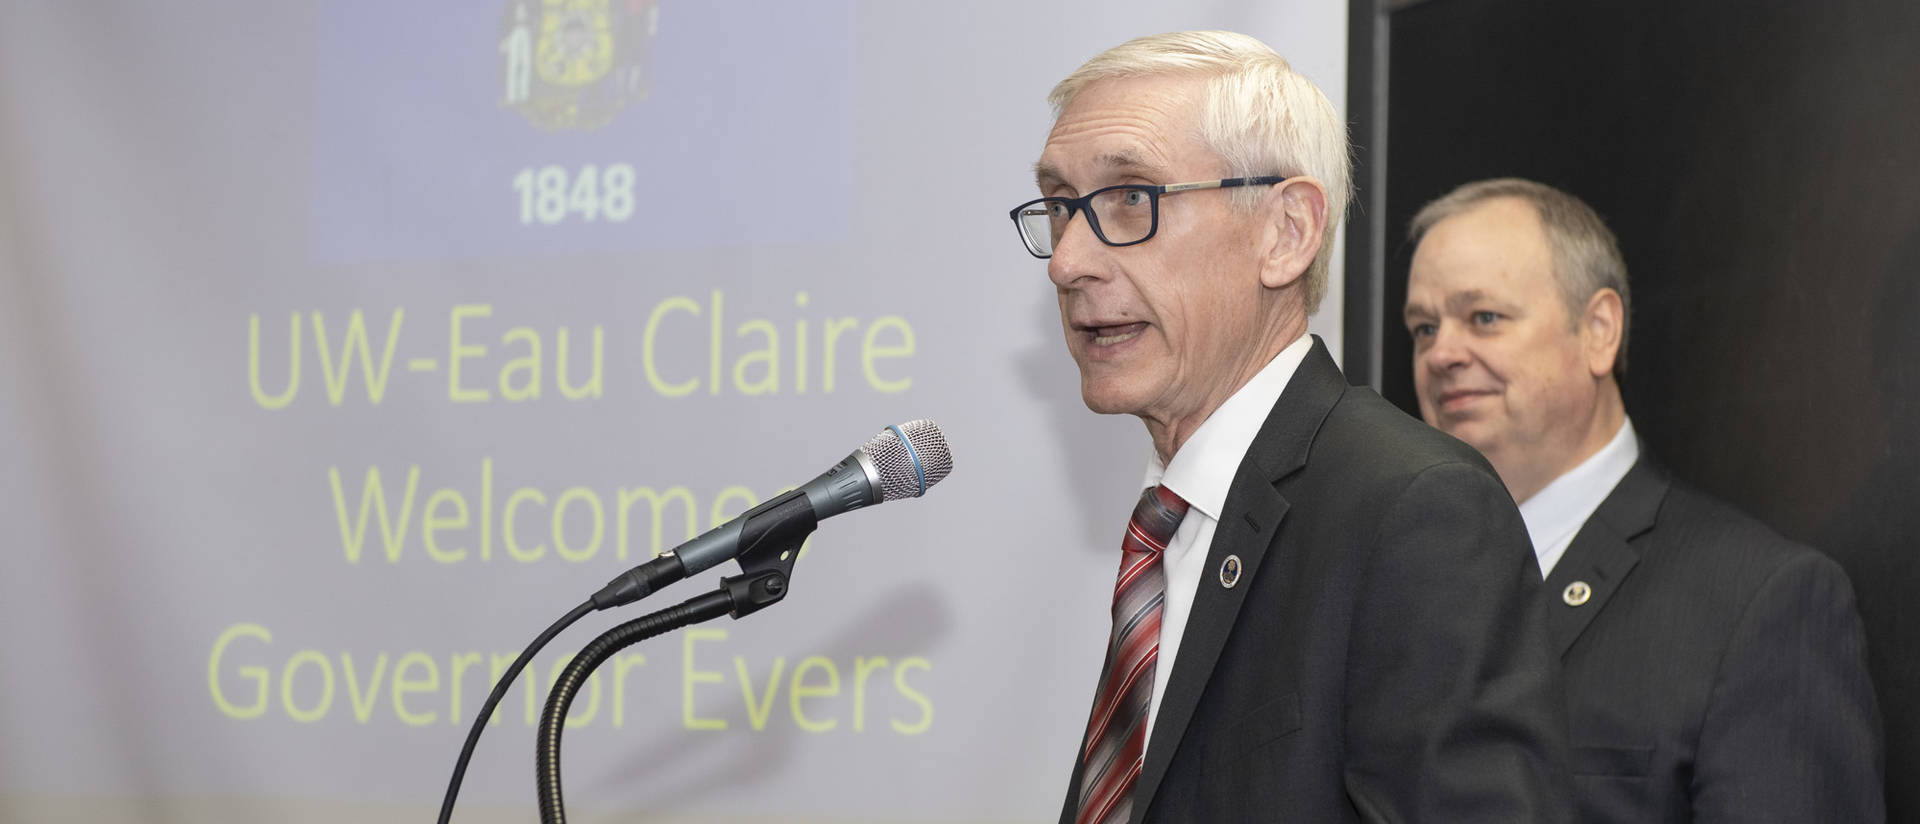 Governor Tony Evers at UW-Eau Claire, March 2019